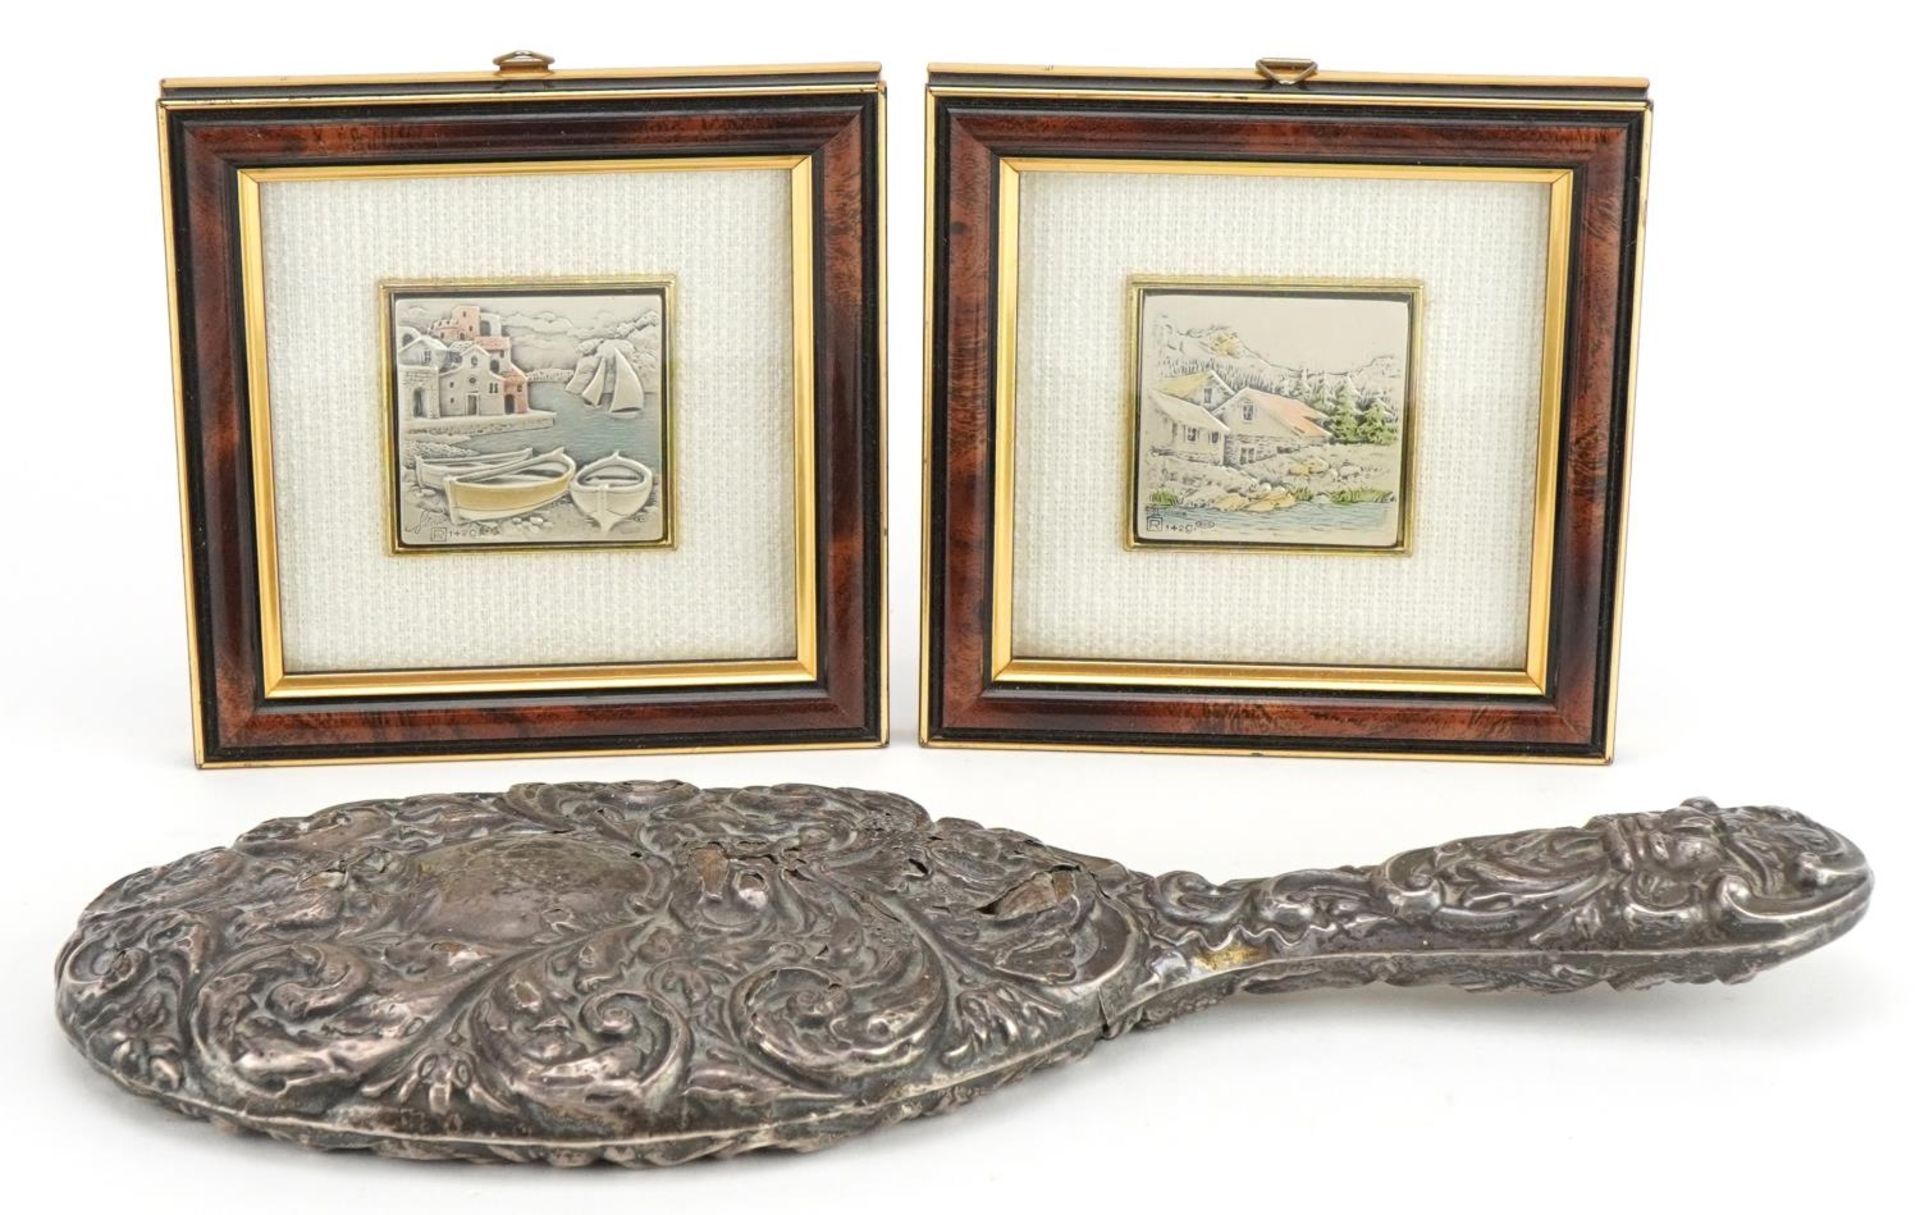 Pair of Cadeor Italian silver plaques housed in glazed frames and a silver backed hand mirror